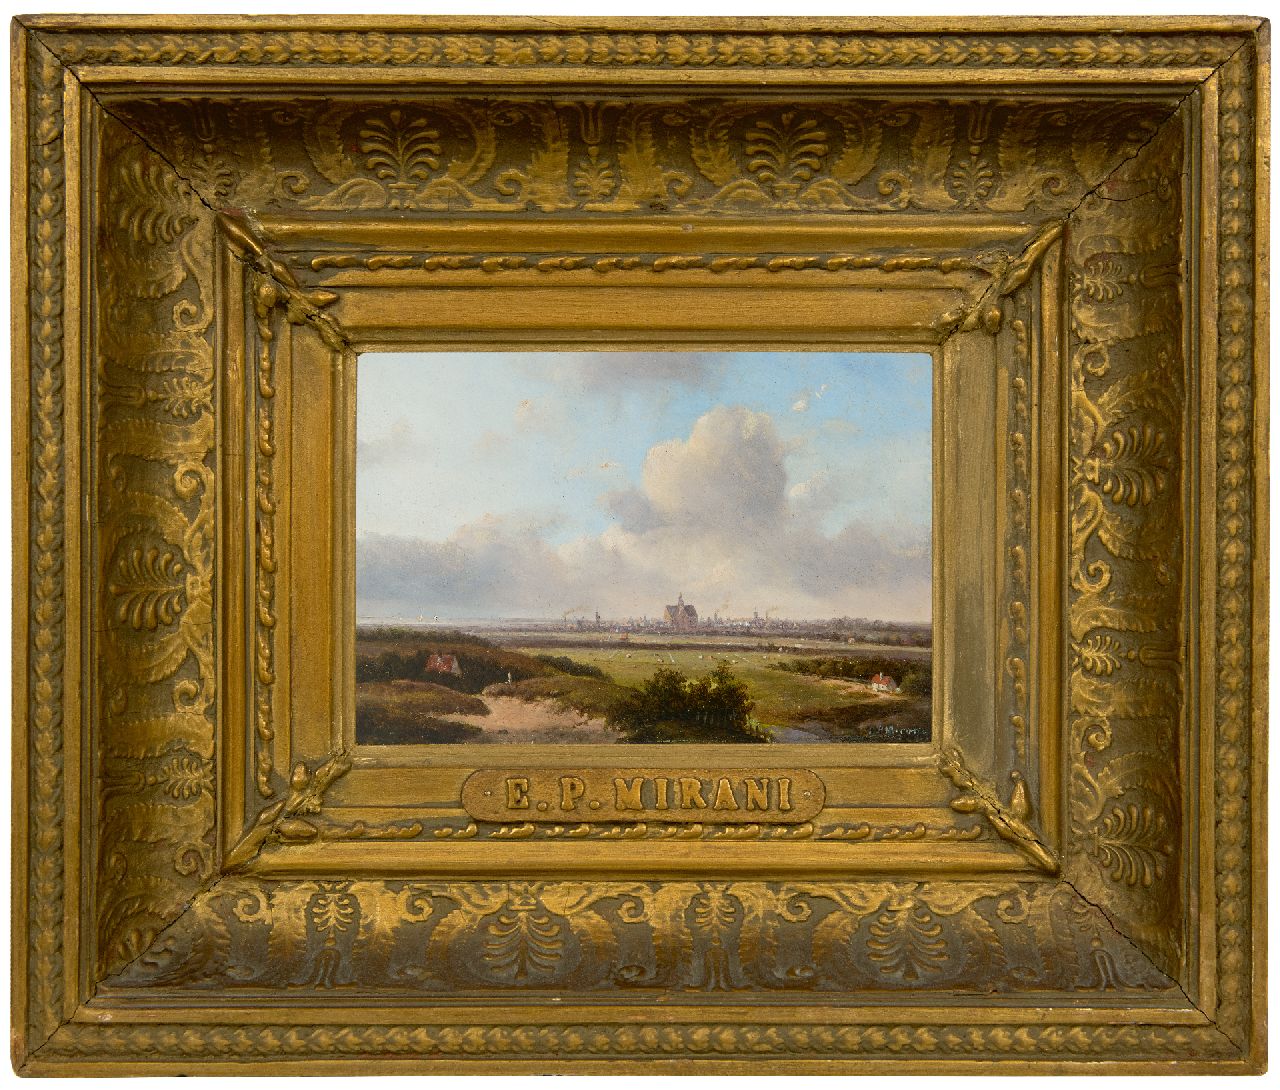 Mirani E.B.G.P.  | 'Everardus' Benedictus Gregorius Pagano Mirani | Paintings offered for sale | Panoramic landscape with Haarlem and the Haarlemmermeer in the distance, oil on panel 13.0 x 18.0 cm, signed l.r.